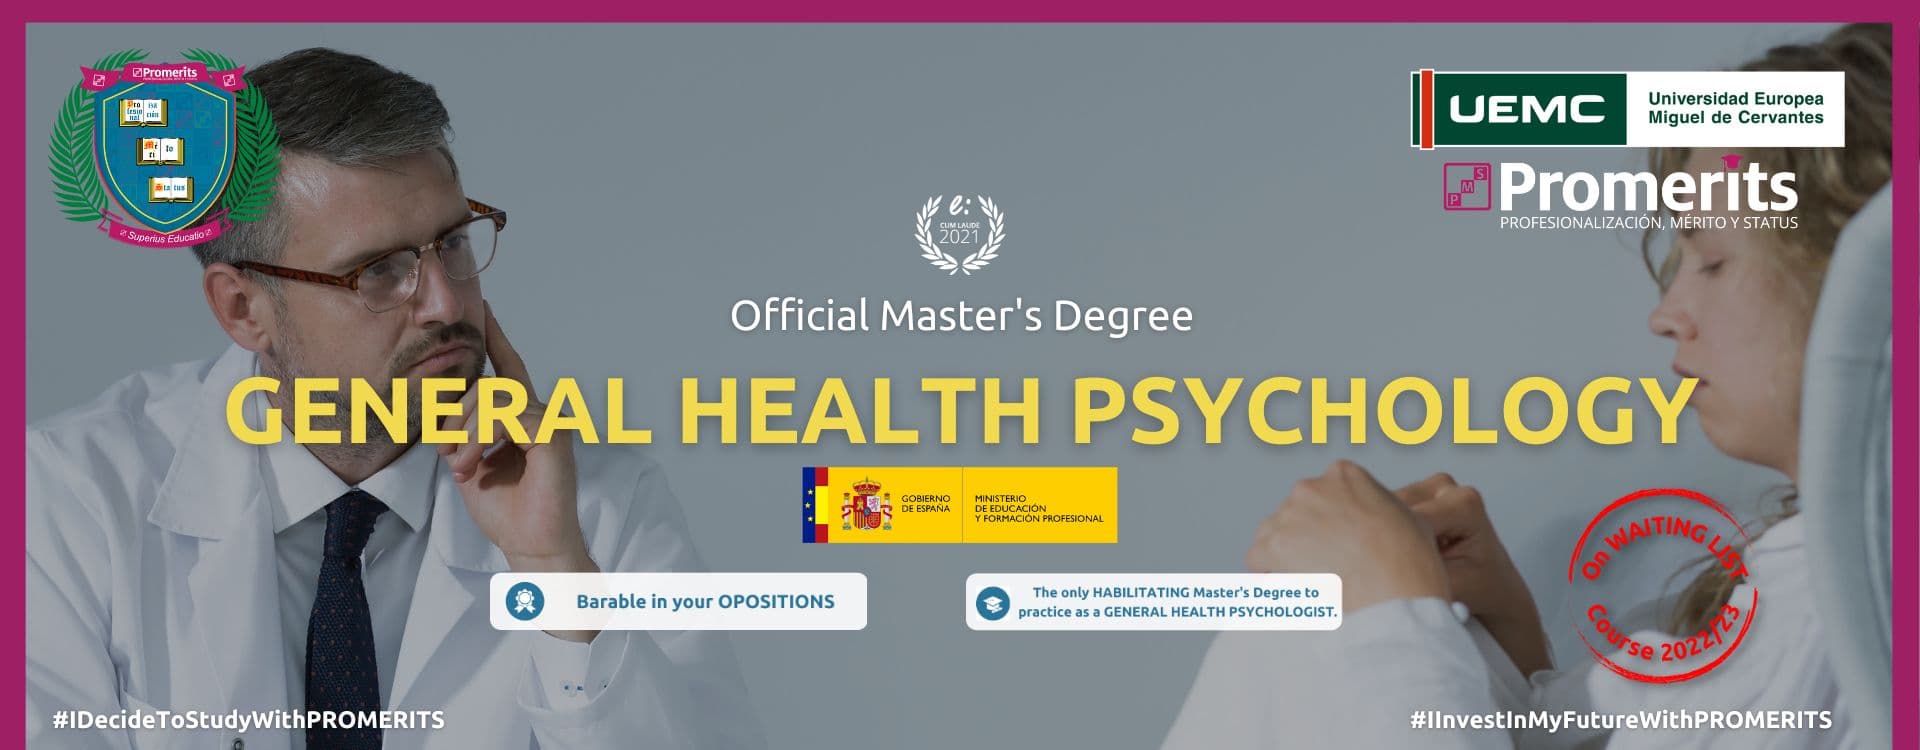 Official University Master's Degree in General Health Psychology